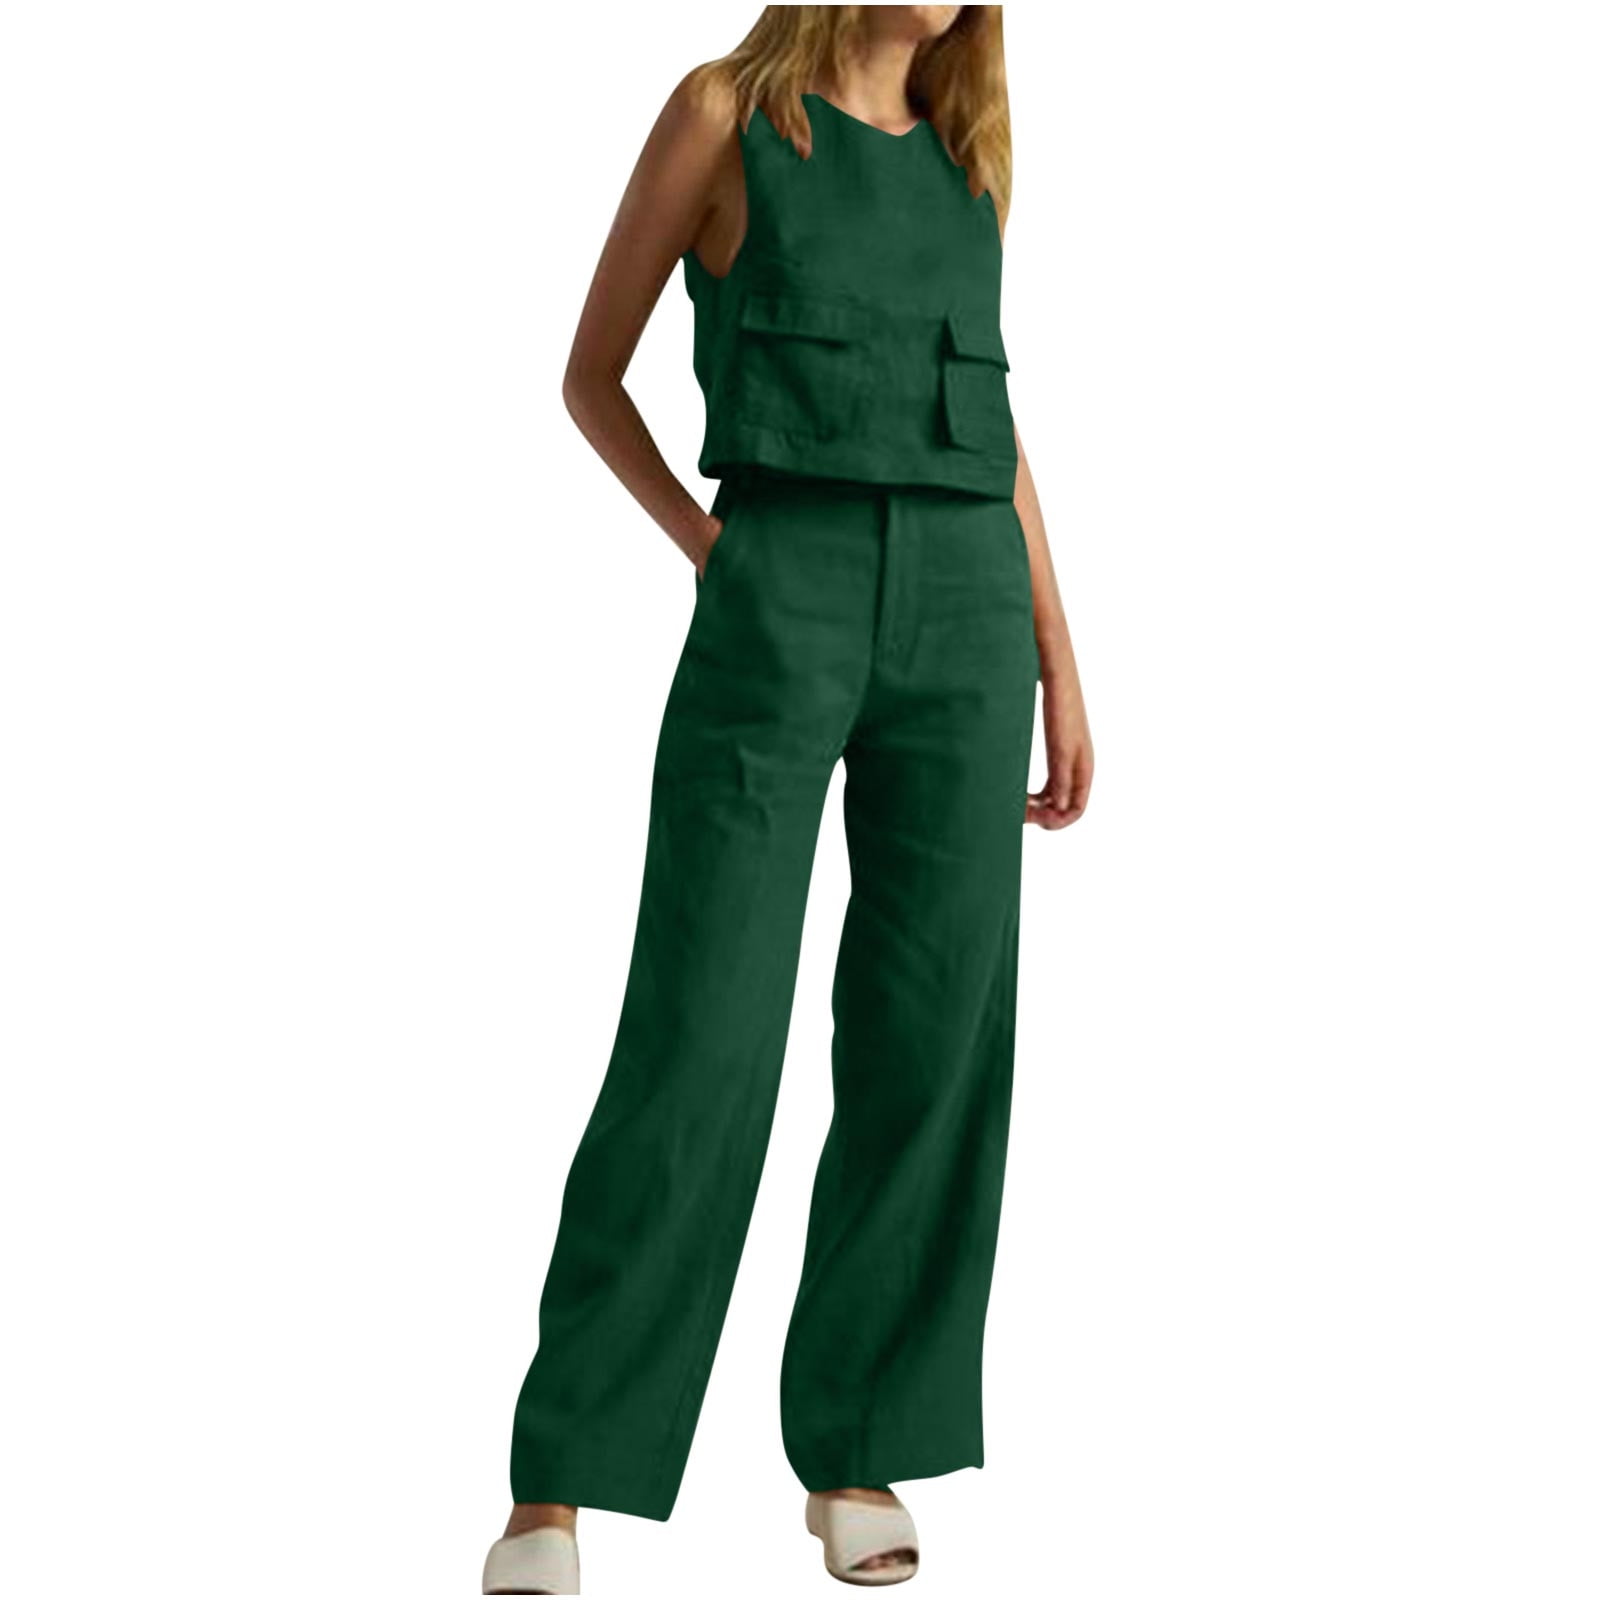 REORIAFEE Outfits for Women Summer Casual Vacation Sets Travel Outfit 2PC  Fashion Women's V Neck Sleeveless Top + Loose Pocket Pants Suit Coffee XXXL